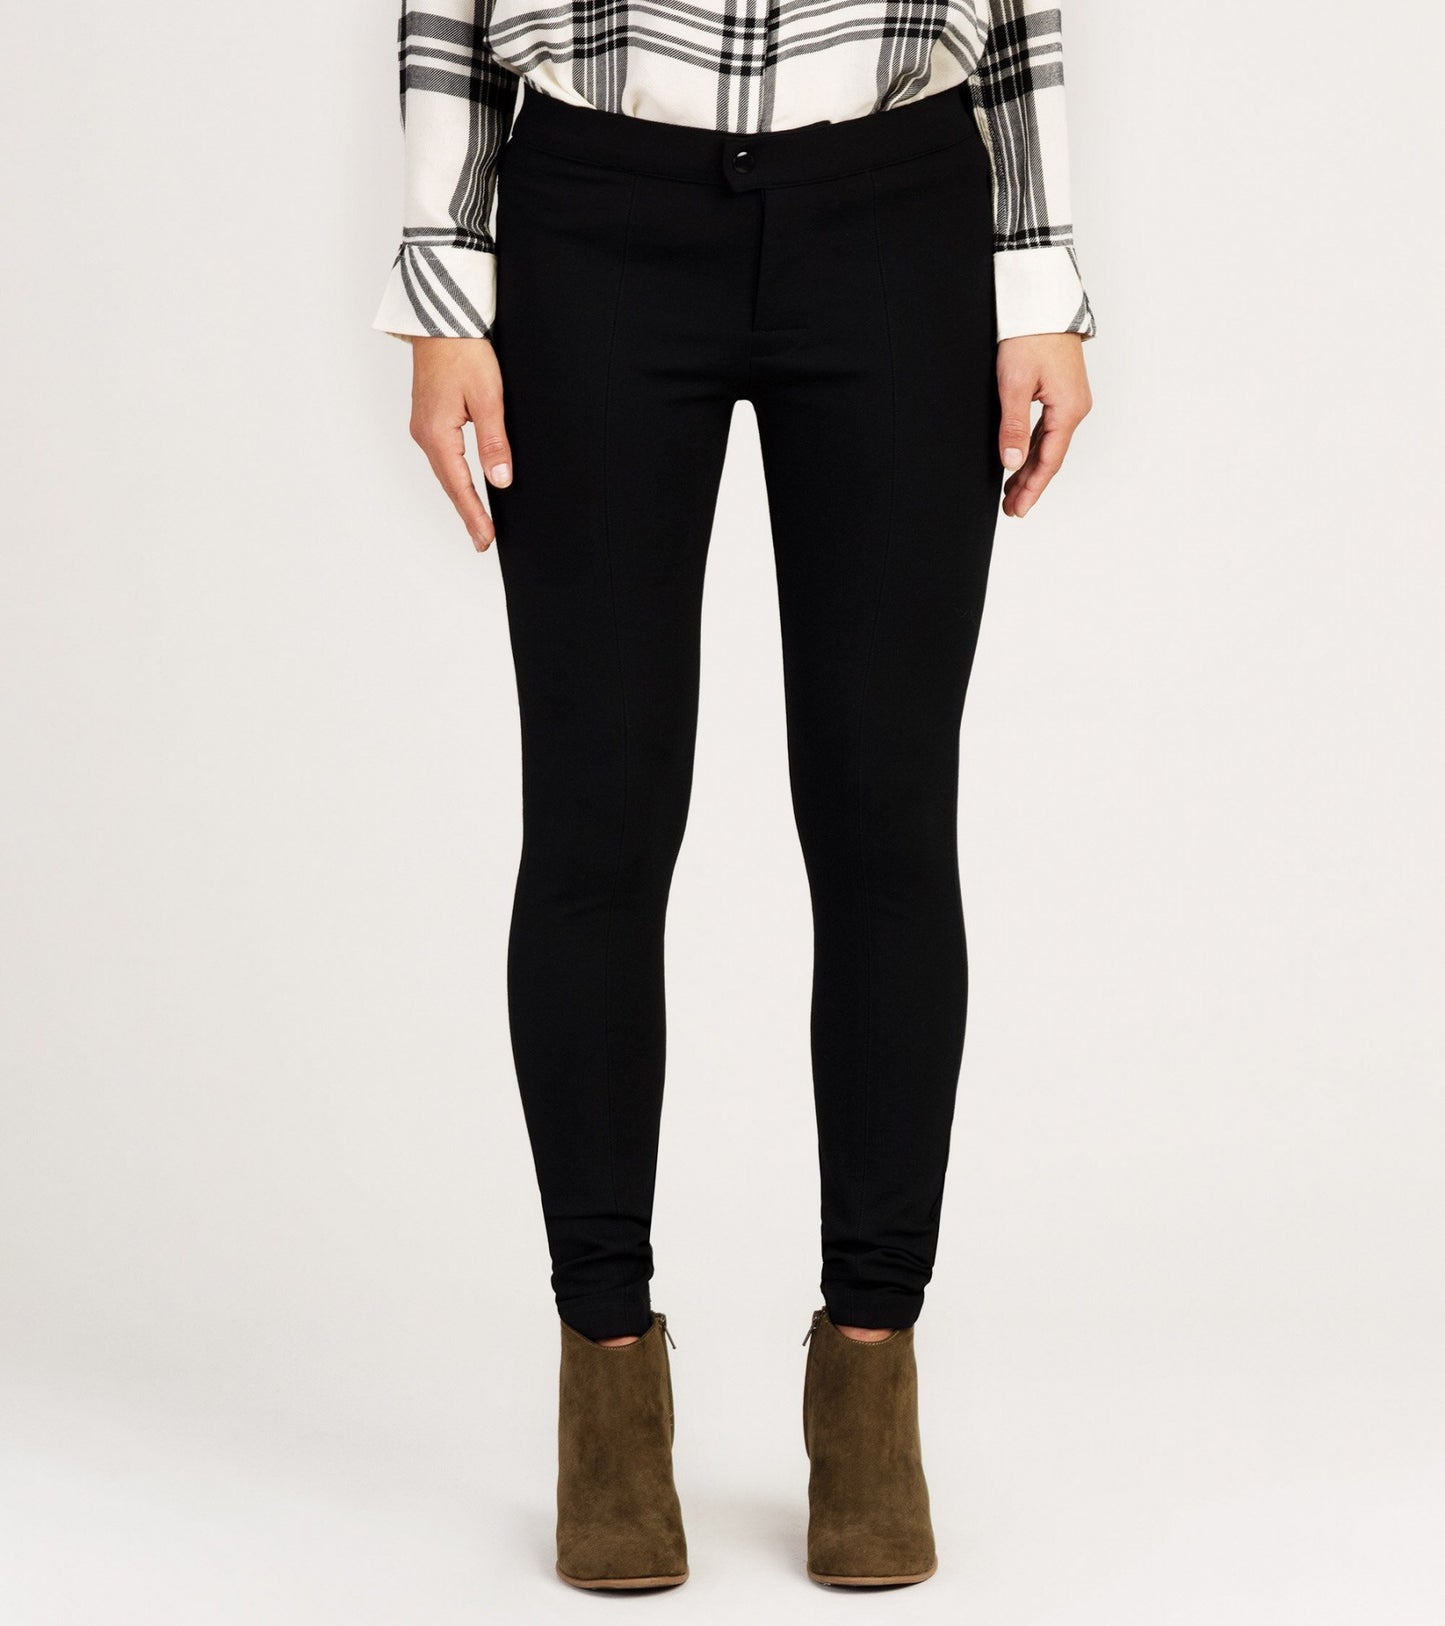 Hatley Black Smart Skinny Pants - Sands Boutique clothing and gifts